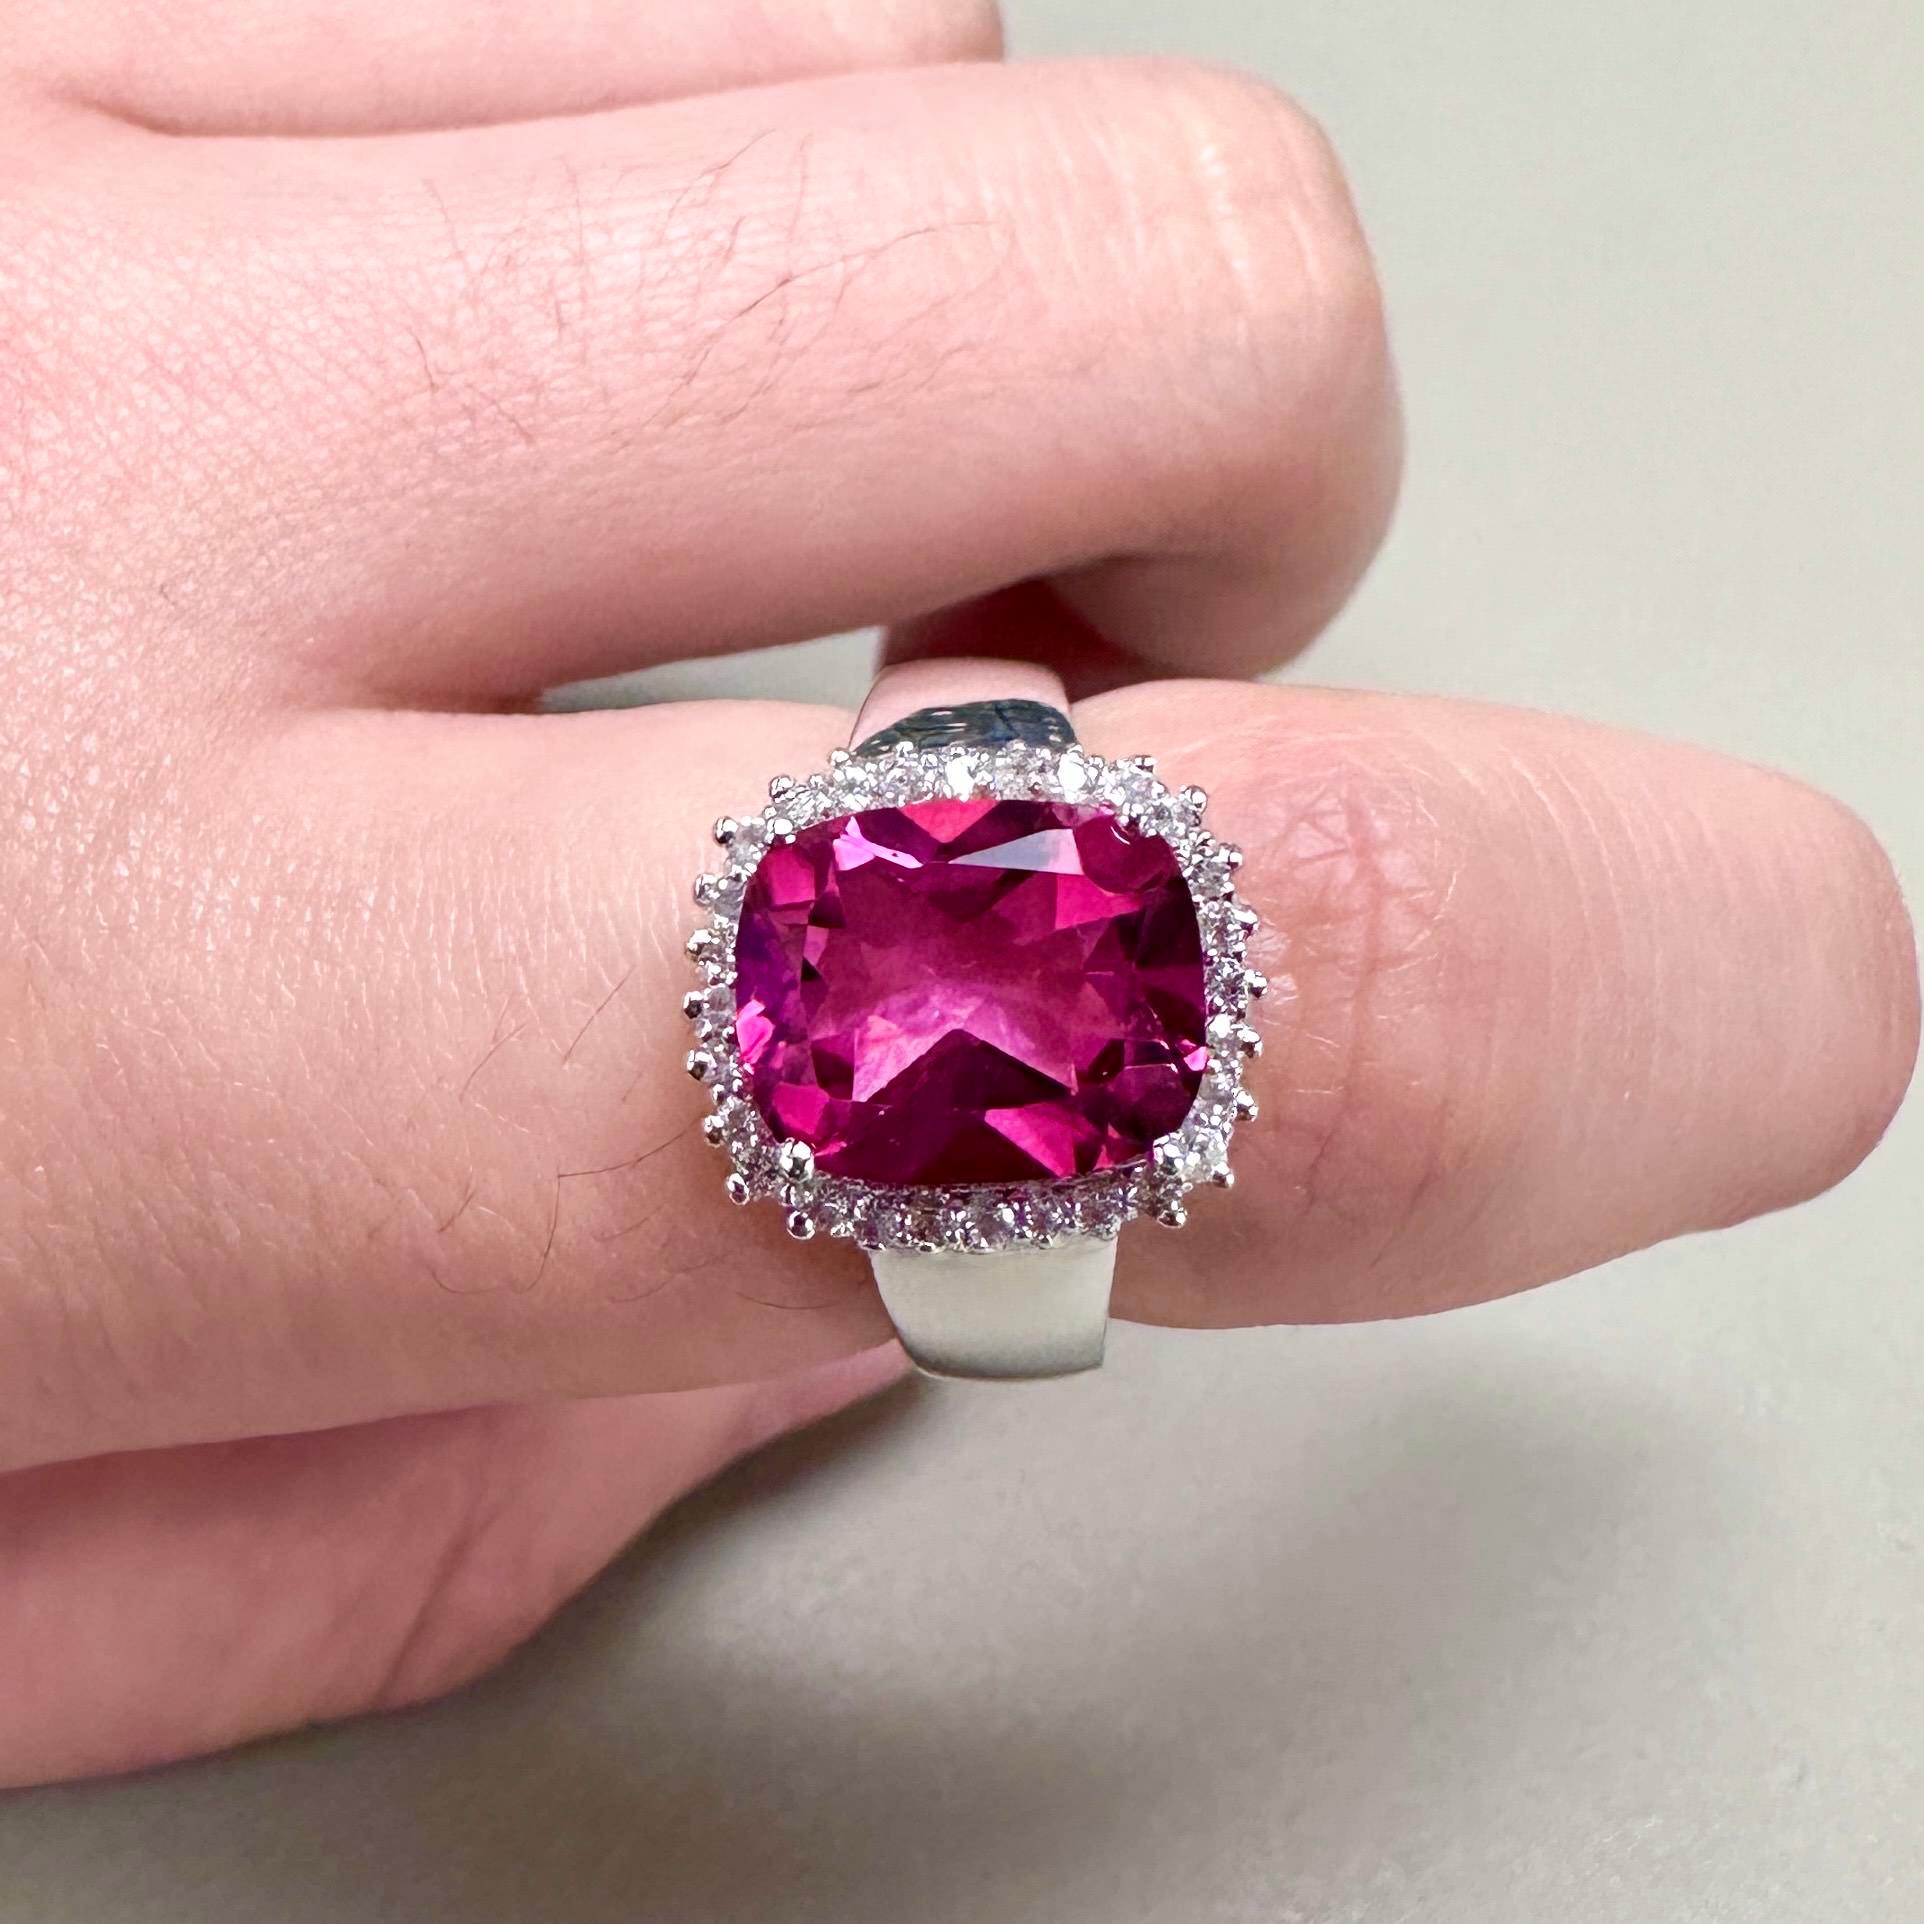 It comes with the Gemological Appraisal by GIA GG/AJP
All Gemstones are Natural
Hot Pink Topaz = 4.12 Carats
28 White Topazes = 0.28 Carats
Metal: Rhodium Plated Sterling Silver
Ring Size: 7* US
*It can be resized complimentary